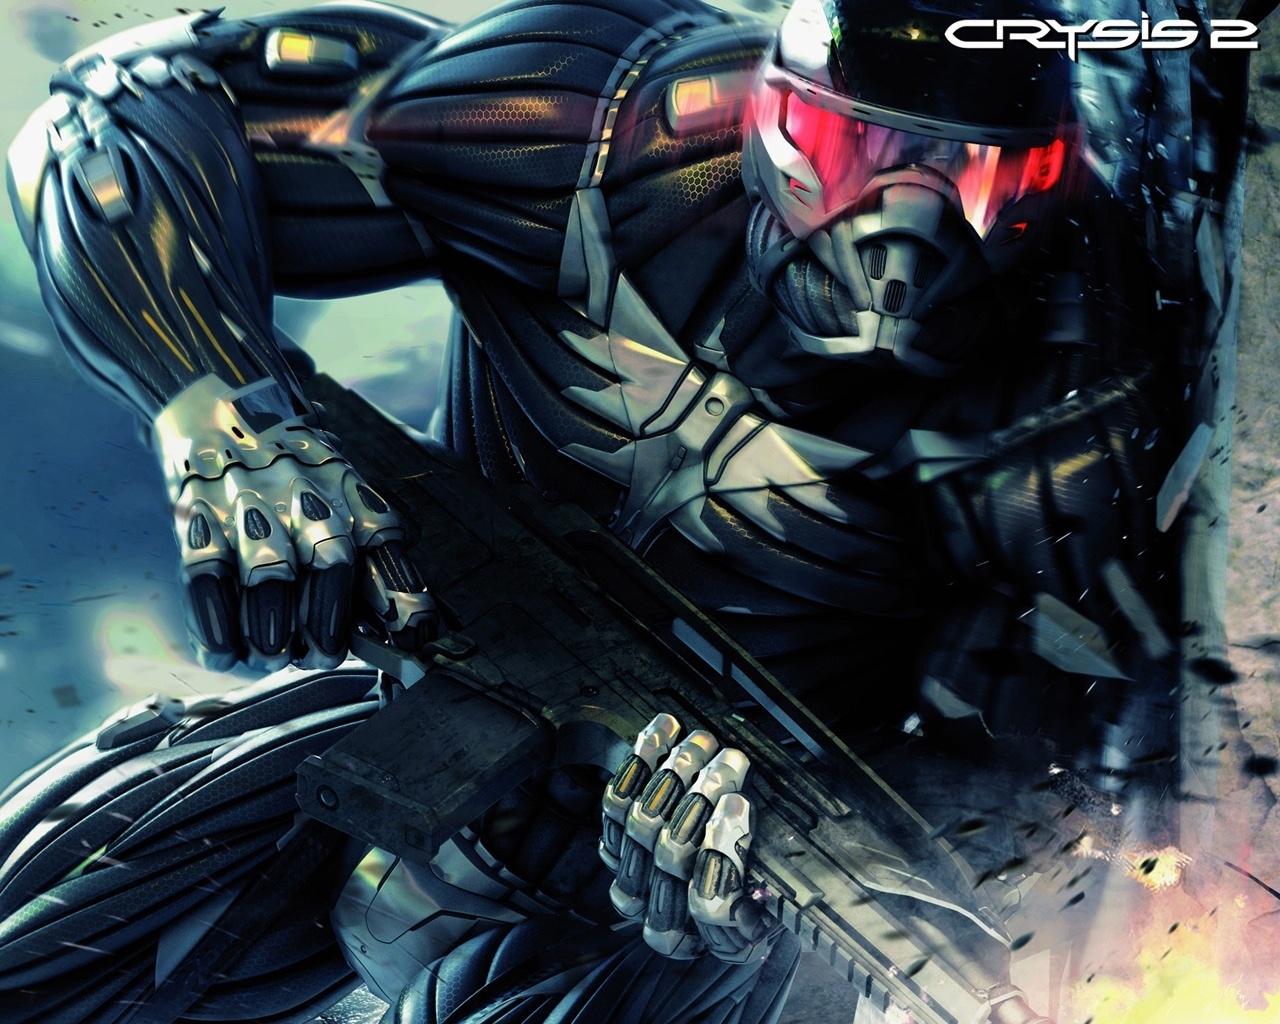 Crysis 2 for 1280 x 1024 resolution